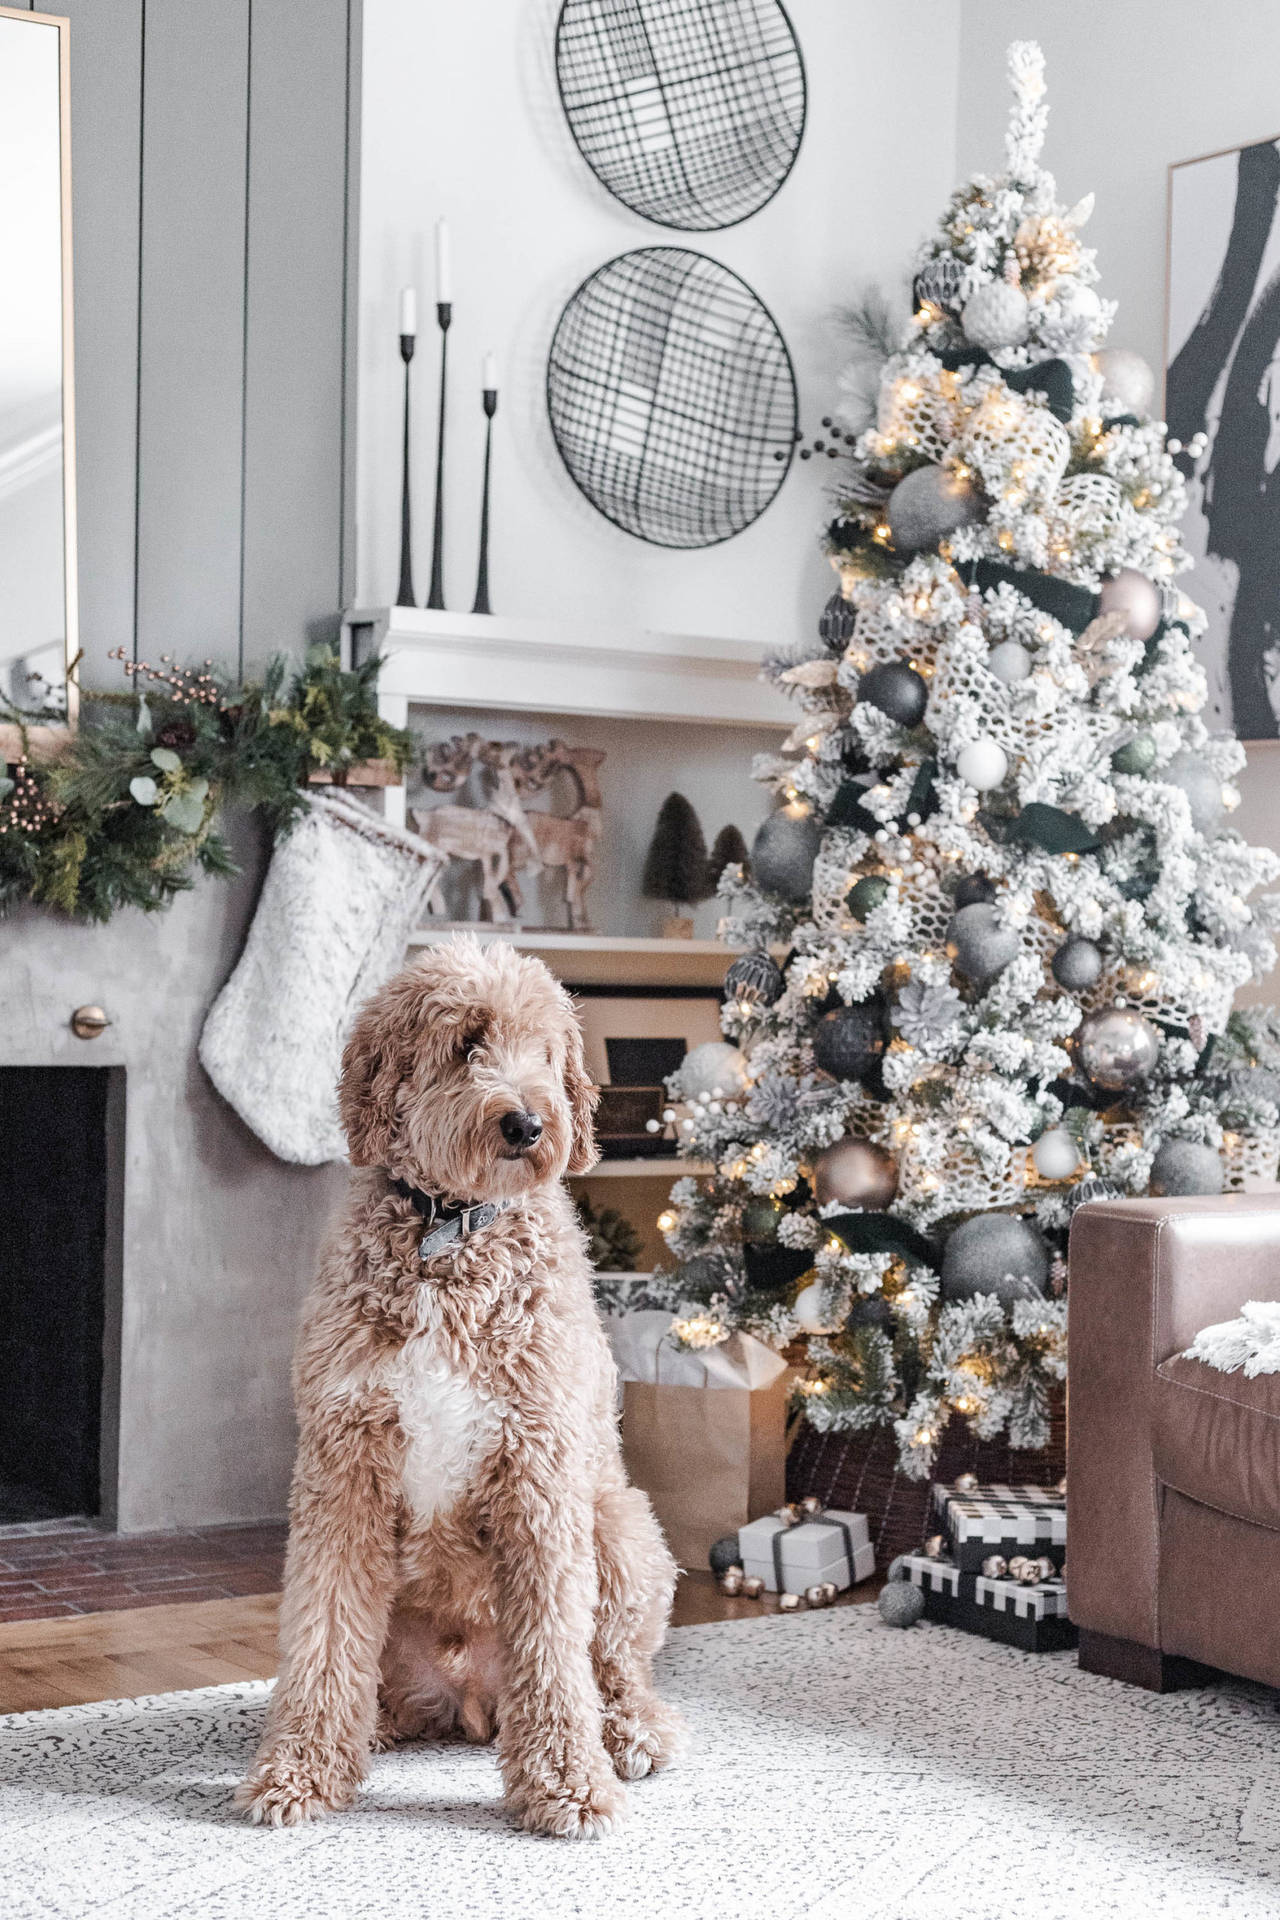 A dog sitting on the floor in front of christmas tree - Christmas, cute Christmas